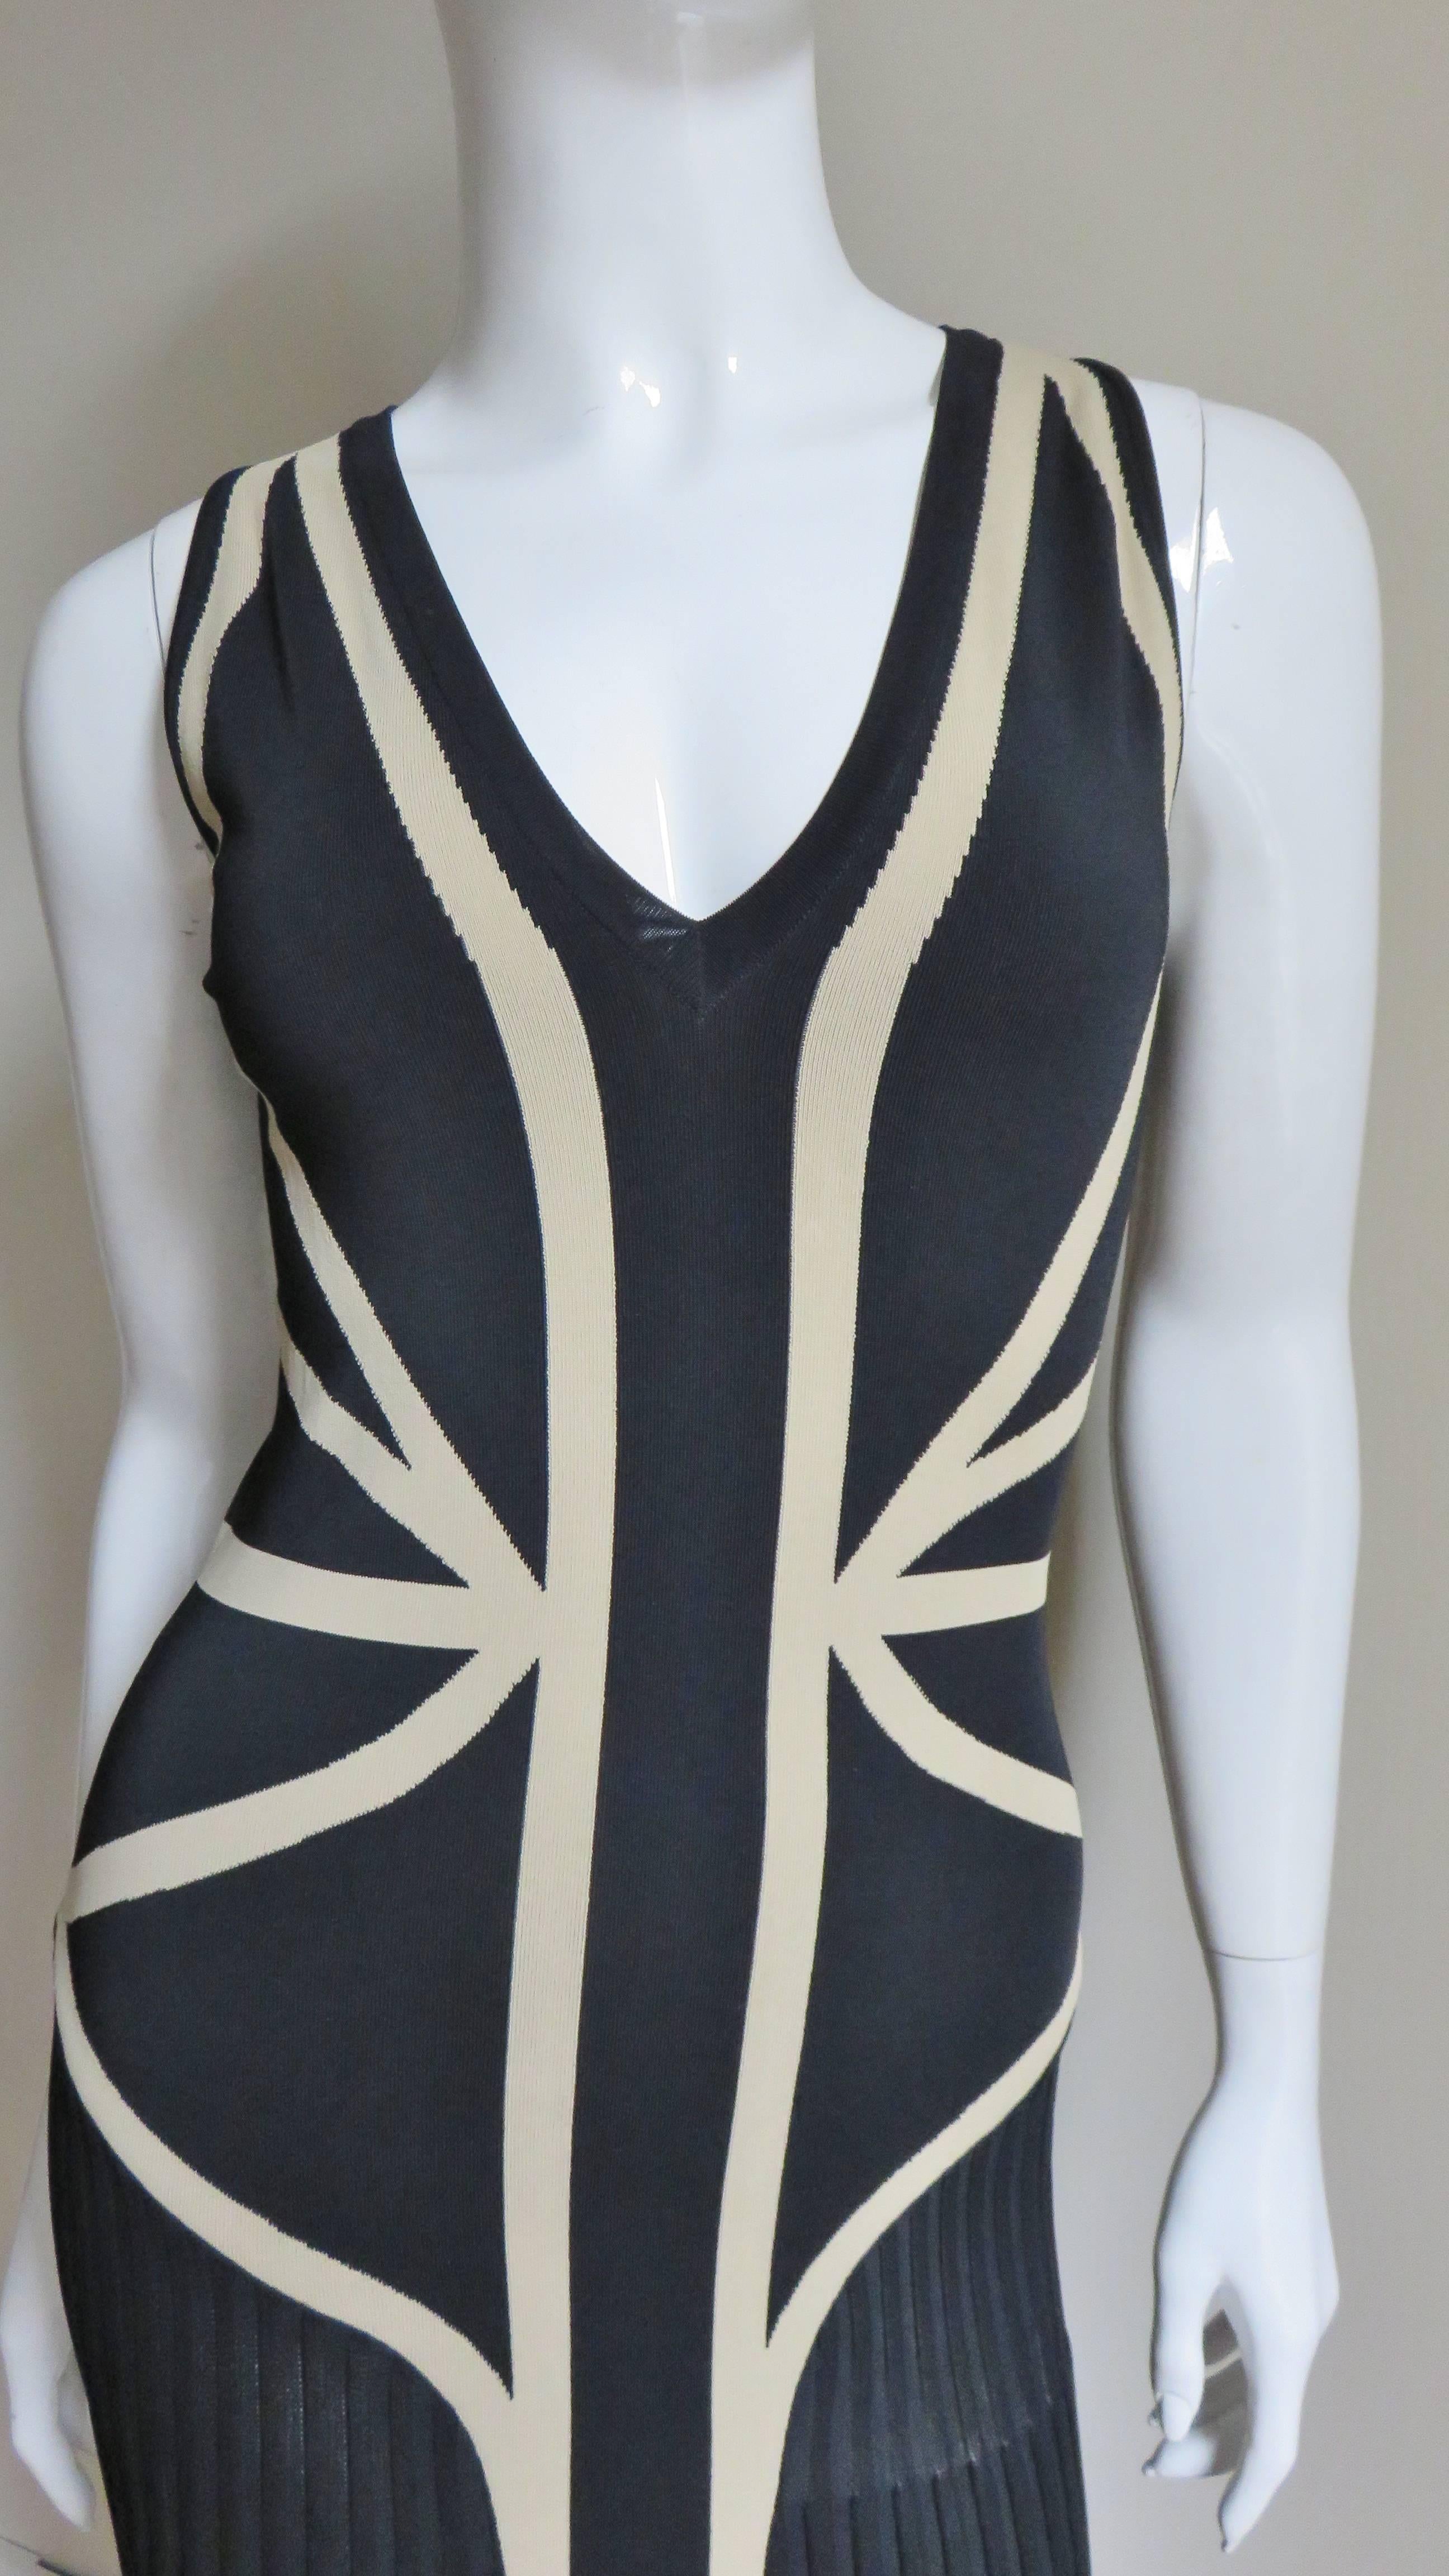 A beautiful dress from Alexander McQueen in back and beige stretch bandage fabric.  It is sleeveless with a V neck flattering with the strategically placed lines of beige cinching the waist.  It is unlined and slips on over the head.   
Appears